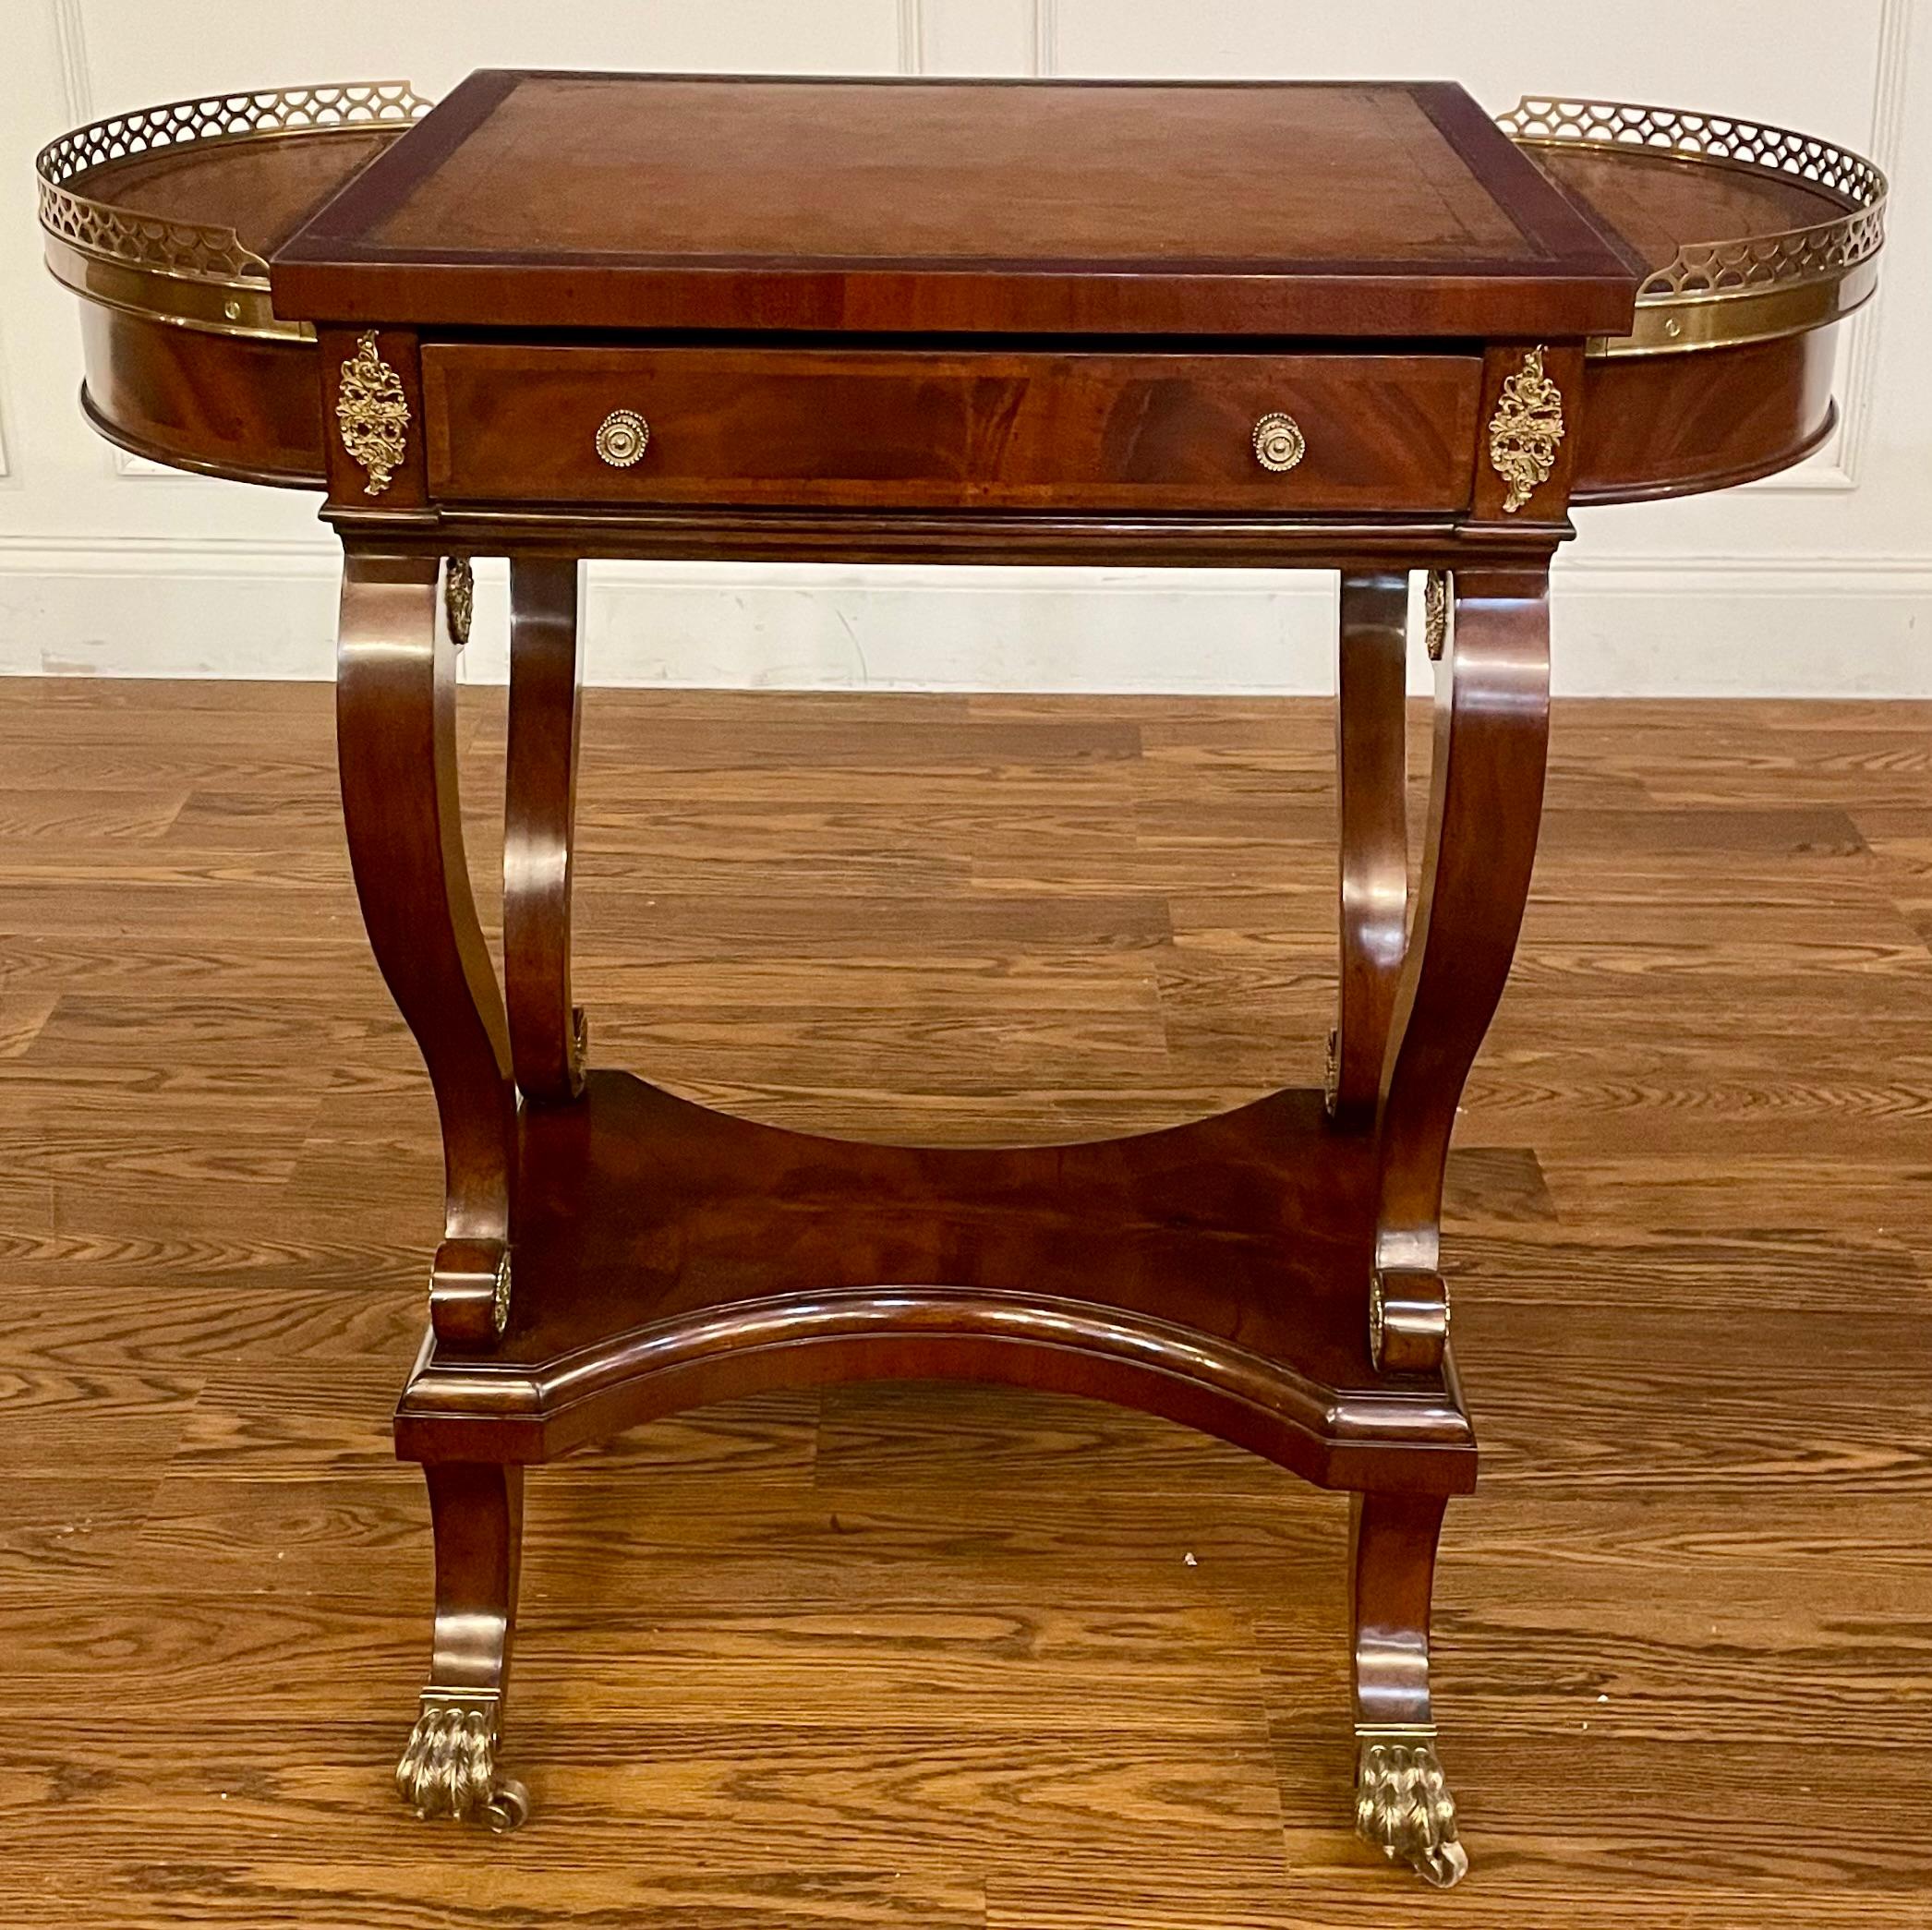 This is a unique mahogany game/occasional  table by Leighton Hall.  It is a showroom sample. It is less than one year old and in very good condition. It features a mildly distressed leather top with edge tooling, two fold up side compartments for